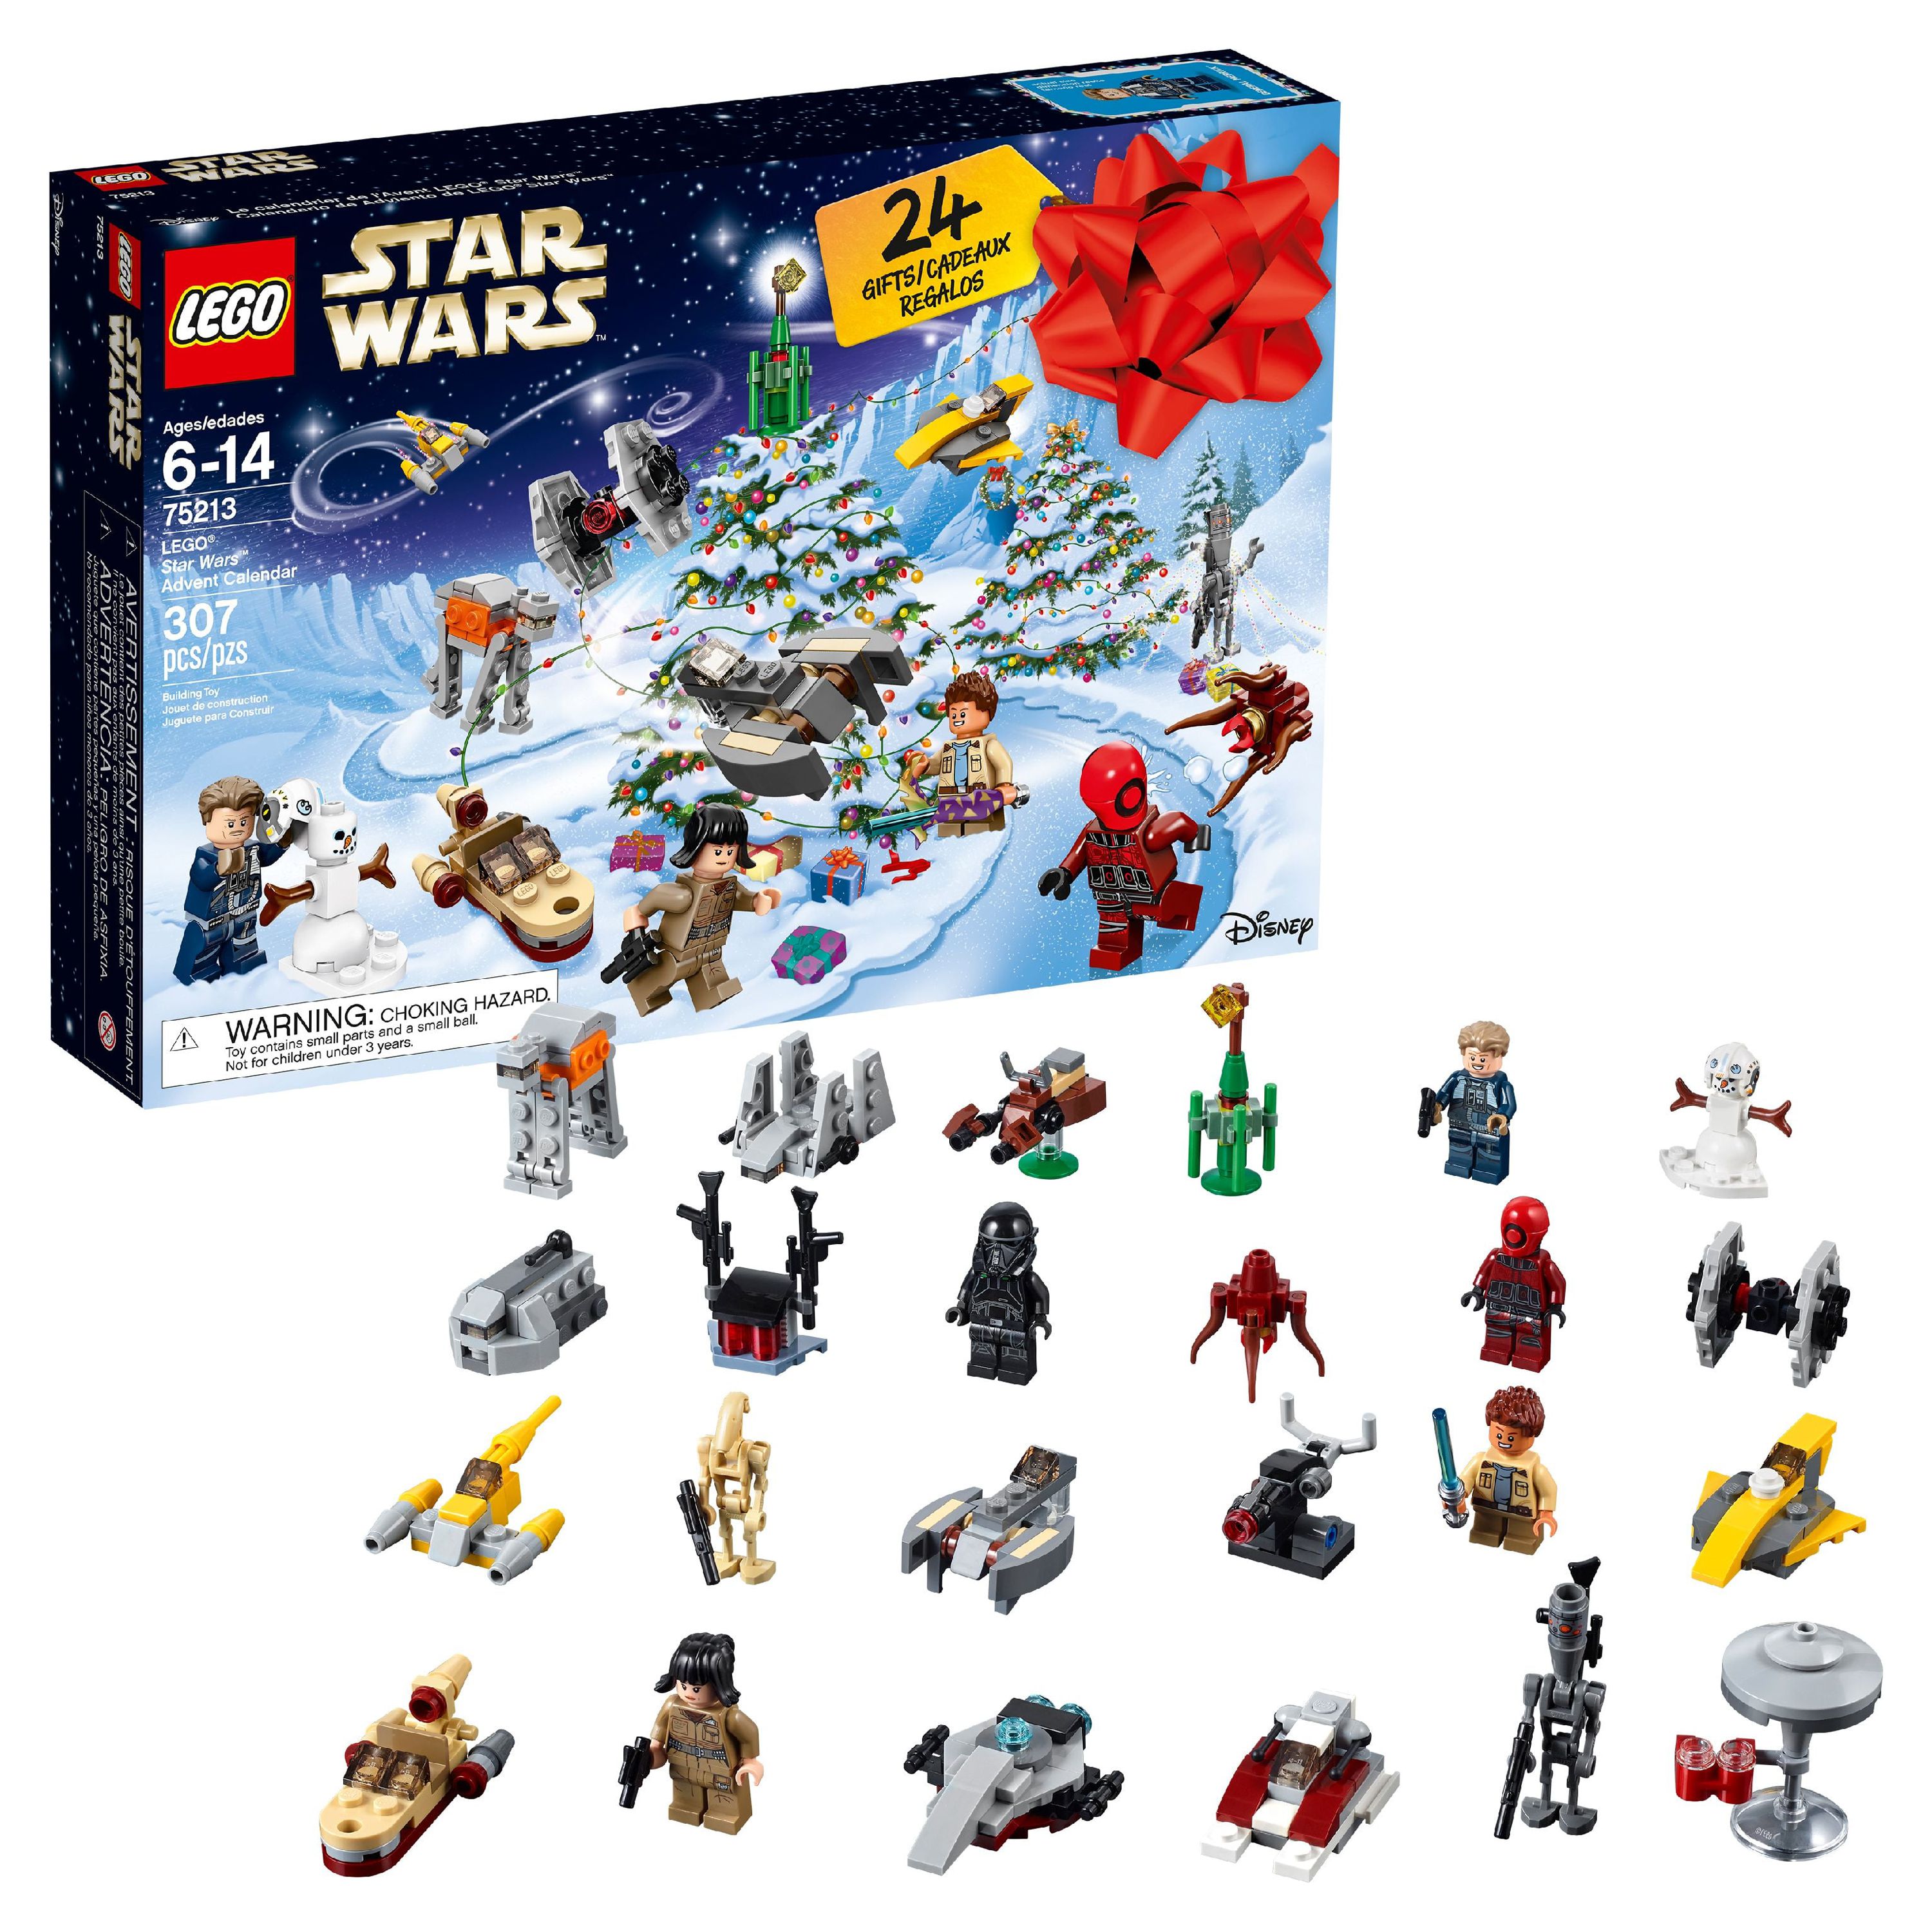 LEGO Star Wars 2018 24 Day Advent Calendar Holiday Set - image 1 of 7